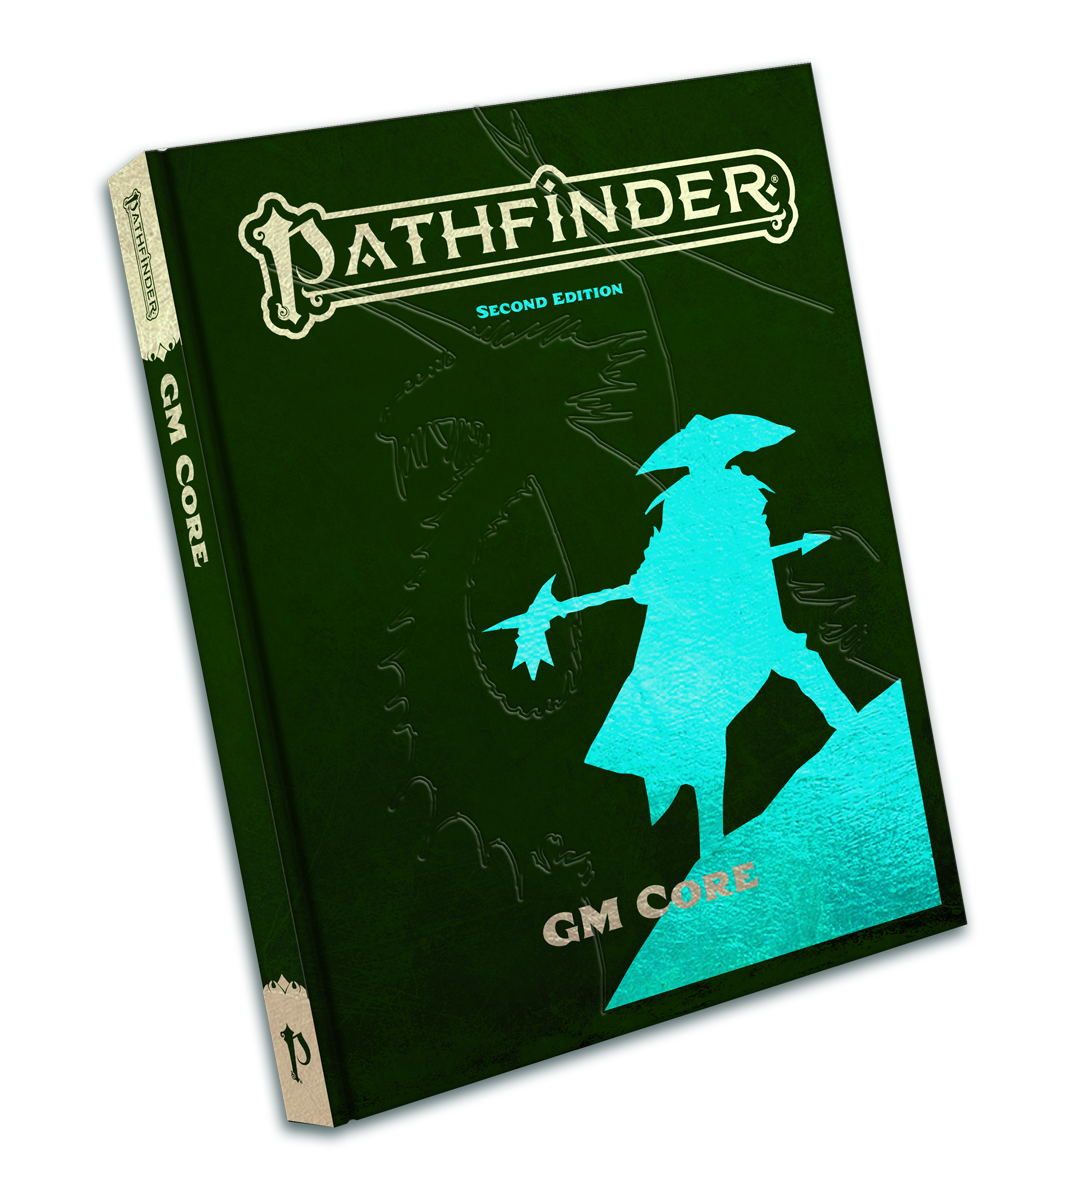 Pathfinder 2E GM Core (Special Edition)